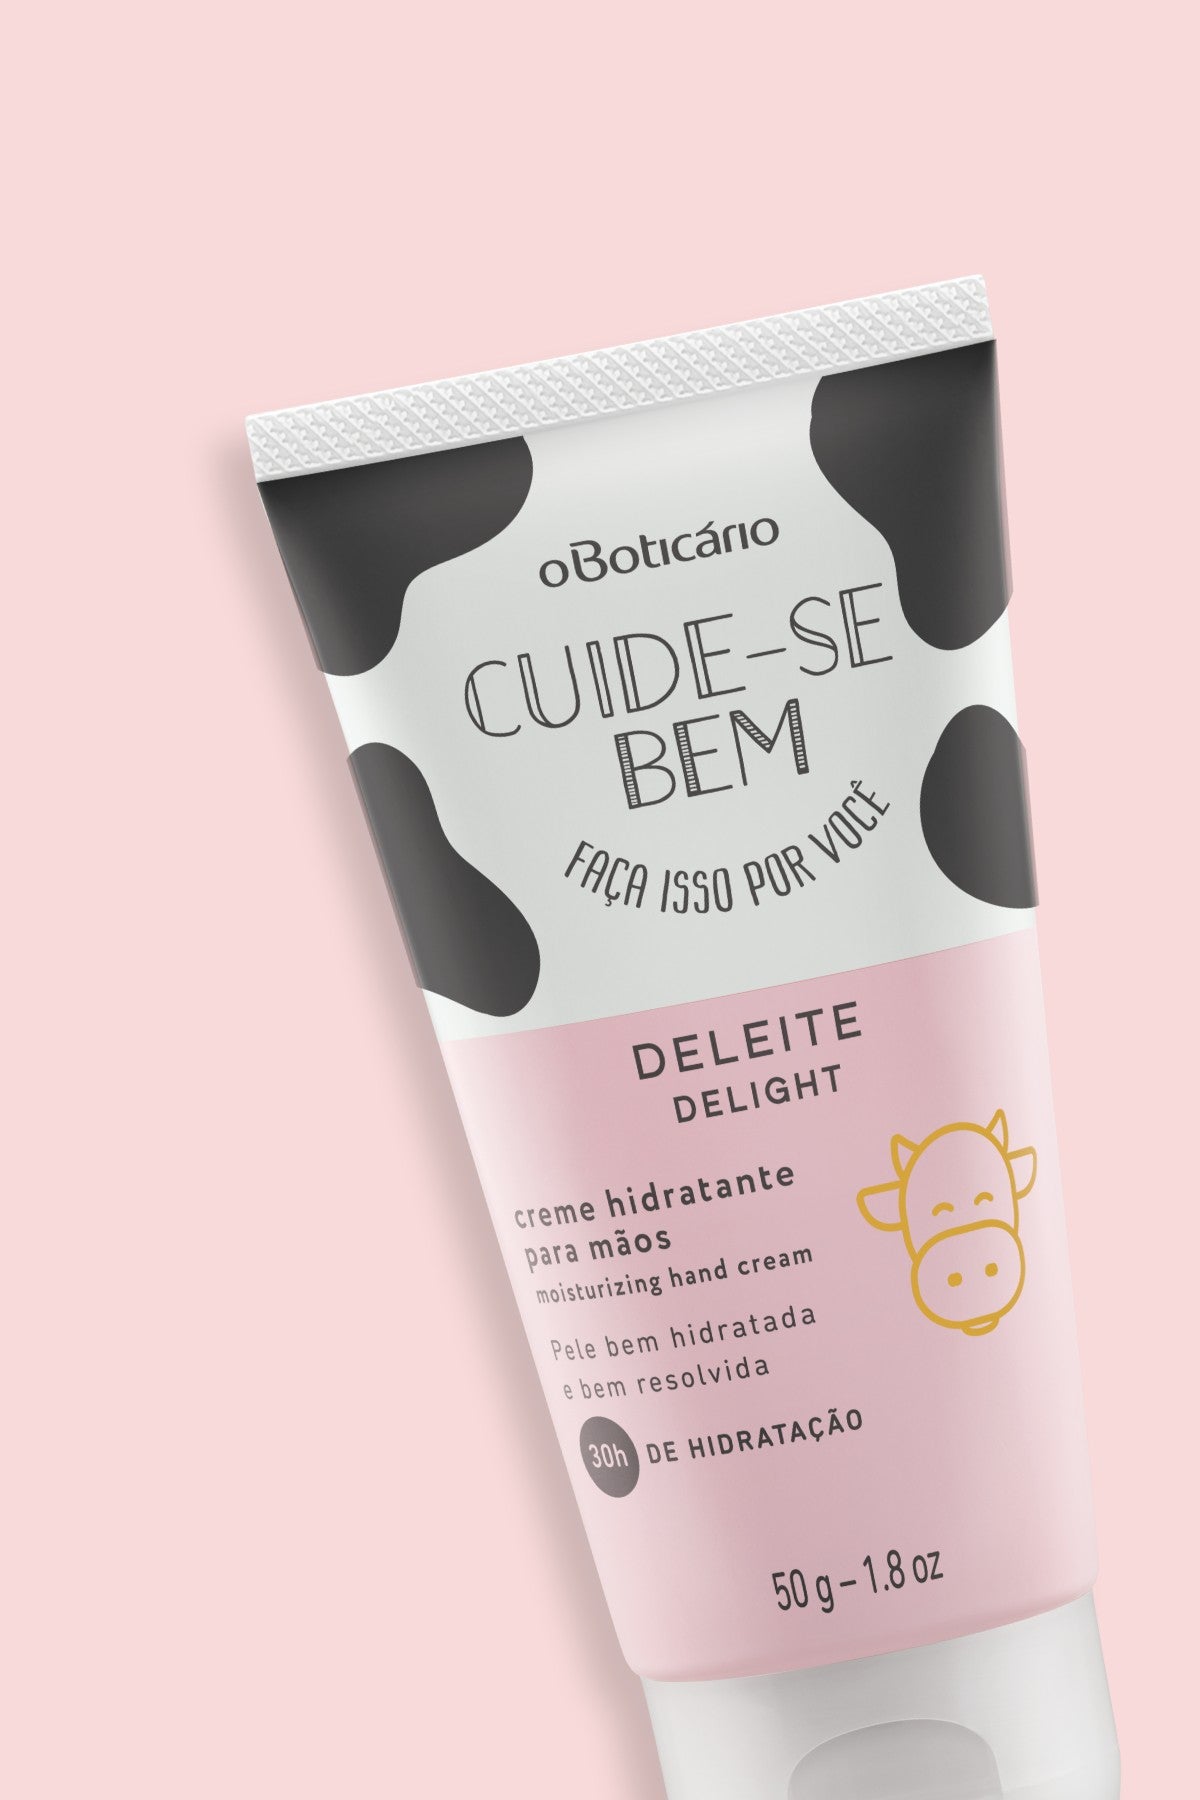 Cuide-se Bem Delight Hand Cream - Limited Edition